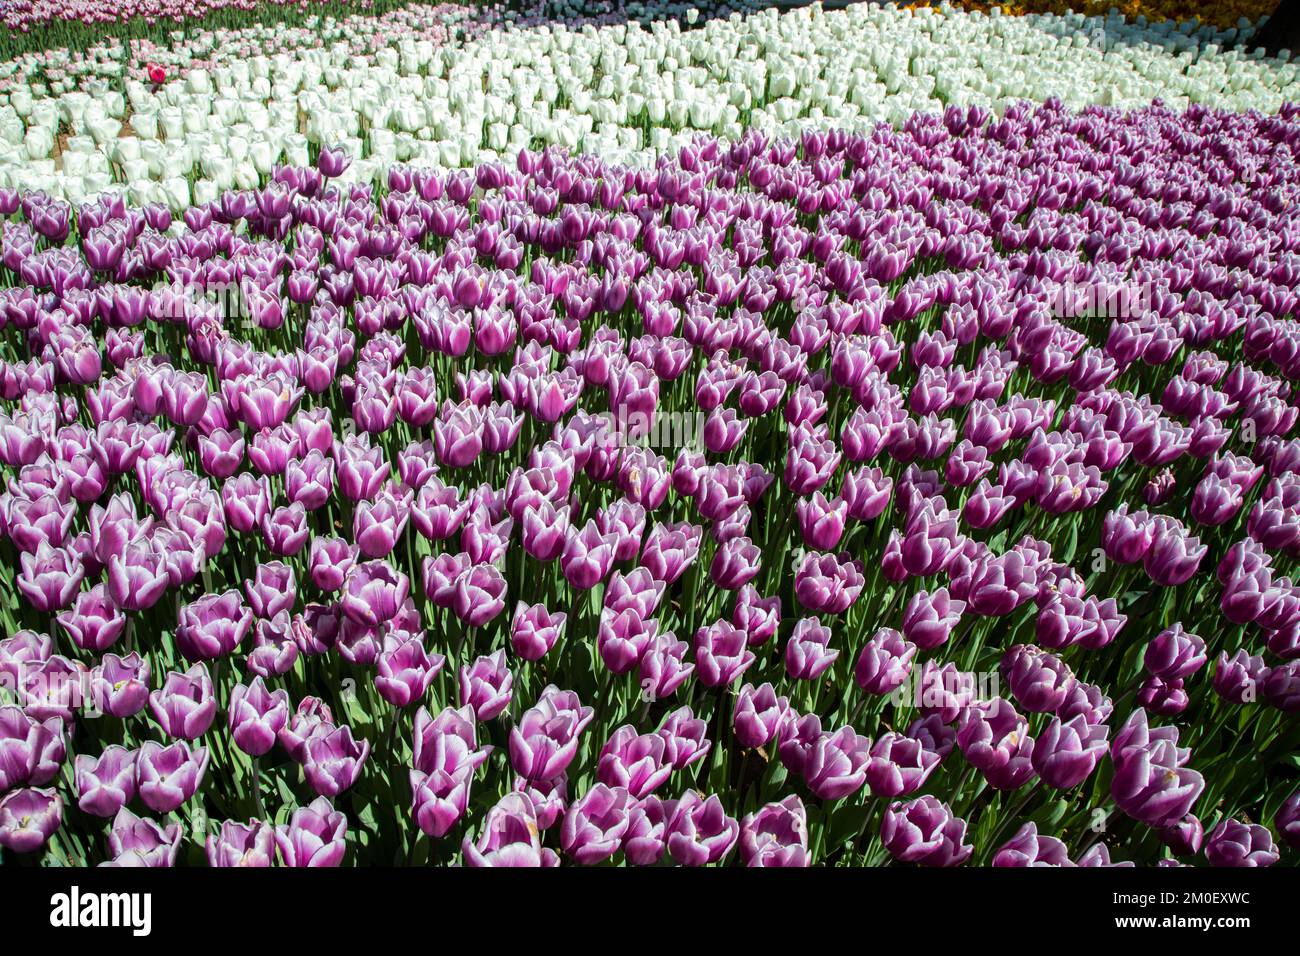 Many purple and white tulips in garden Stock Photo